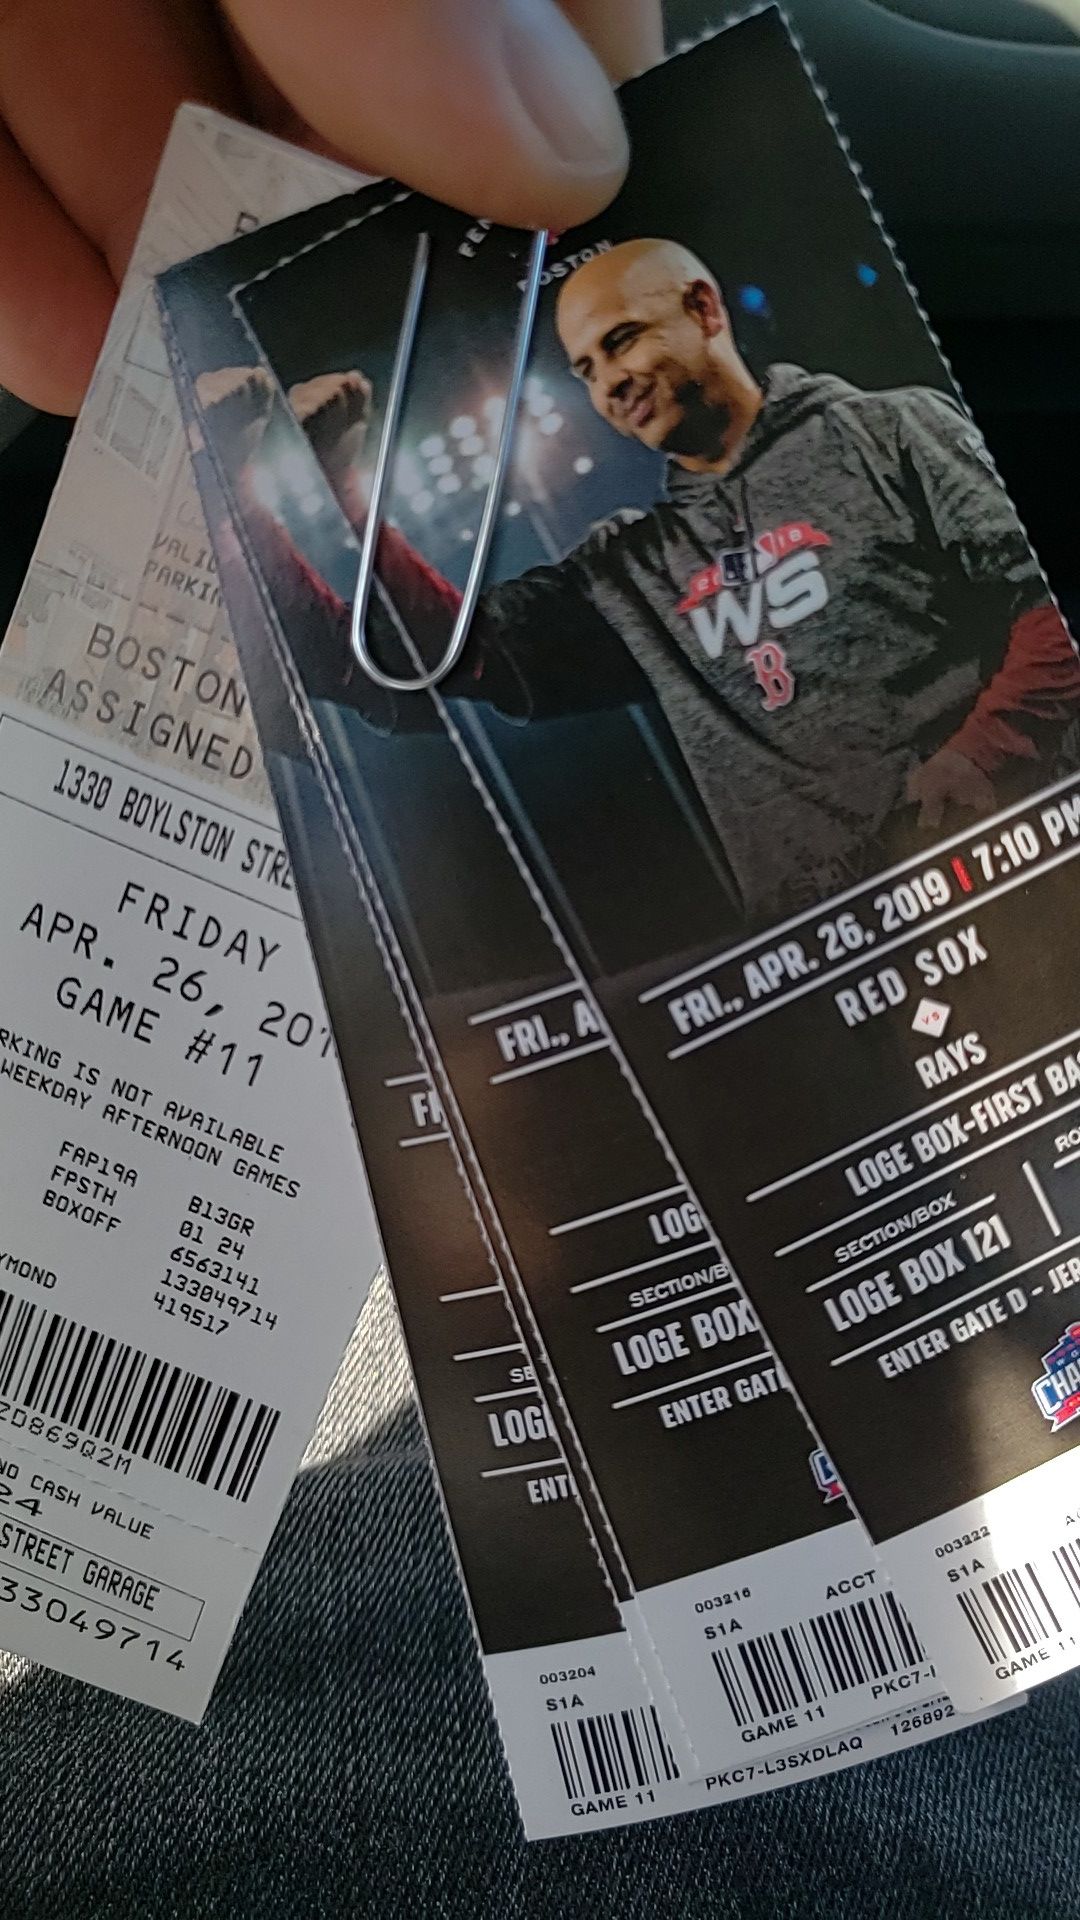 Red Sox tickets